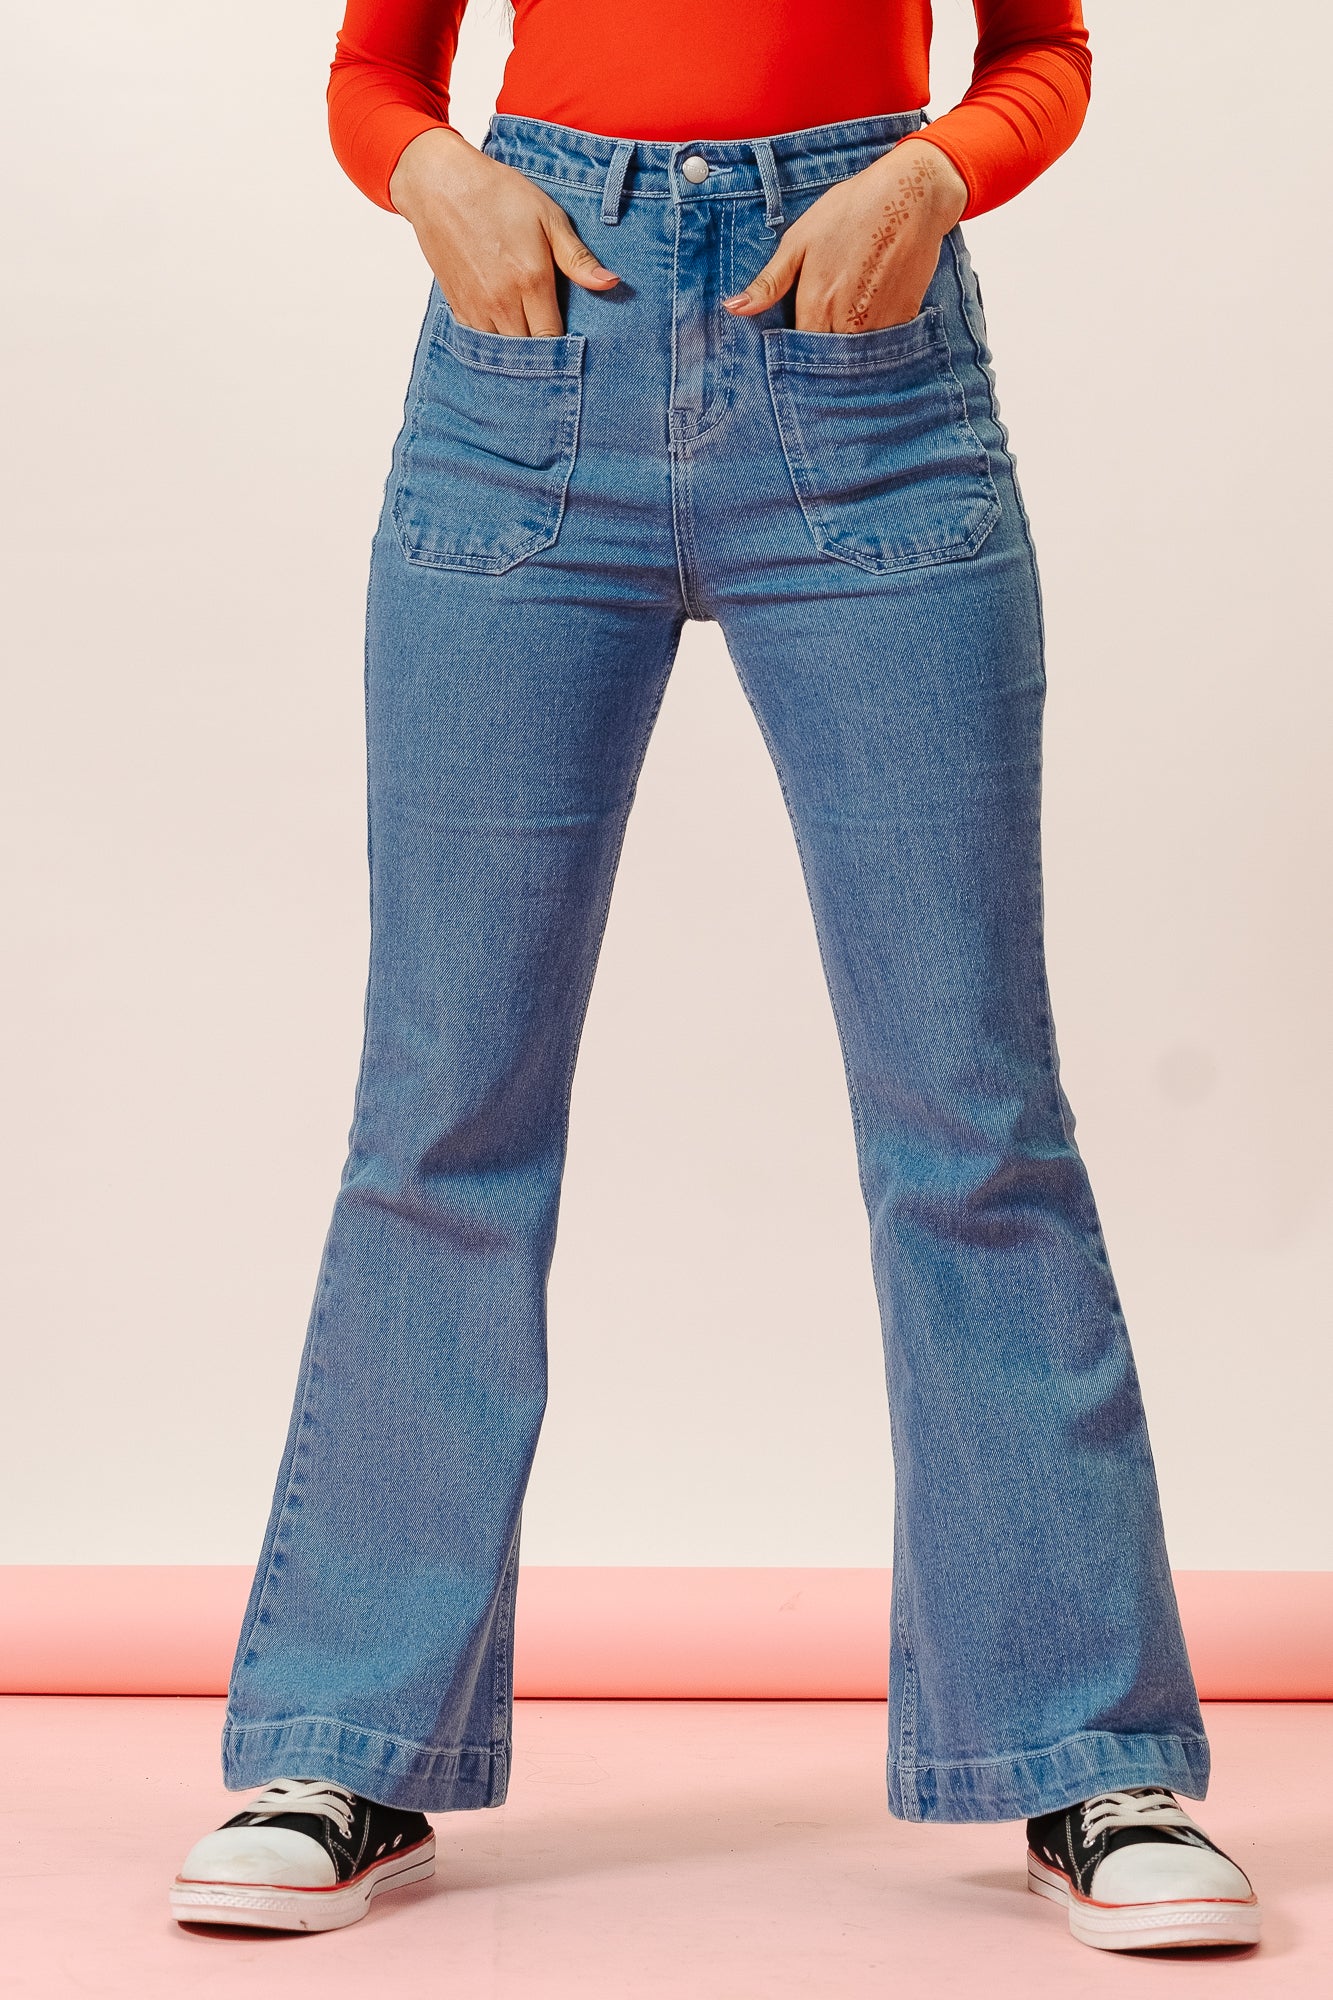 Shop for Bootcut Jeans Pants for Women Starting @ ₹999